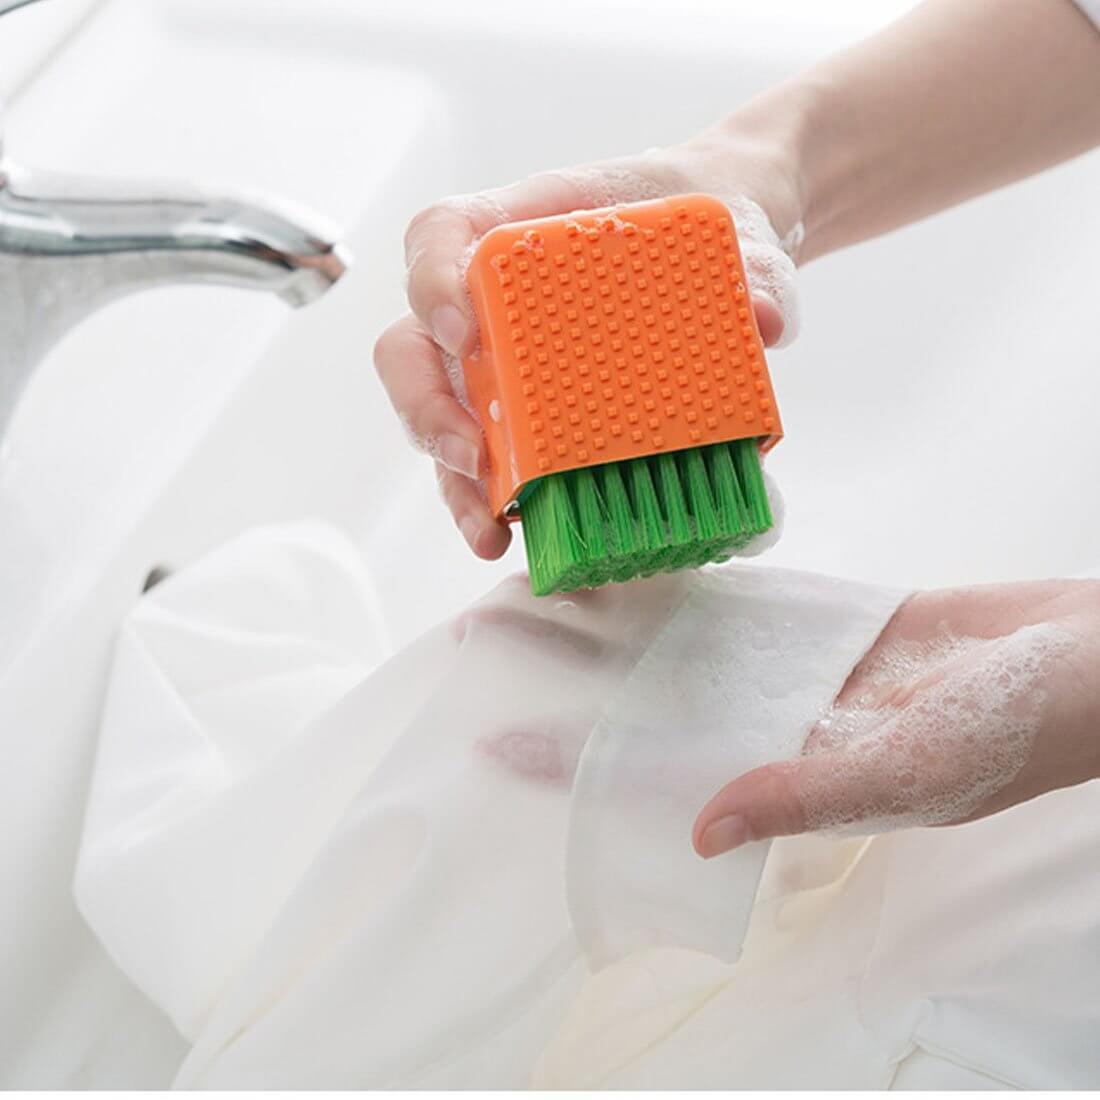 Laundry brush is a hostel trick for saving money